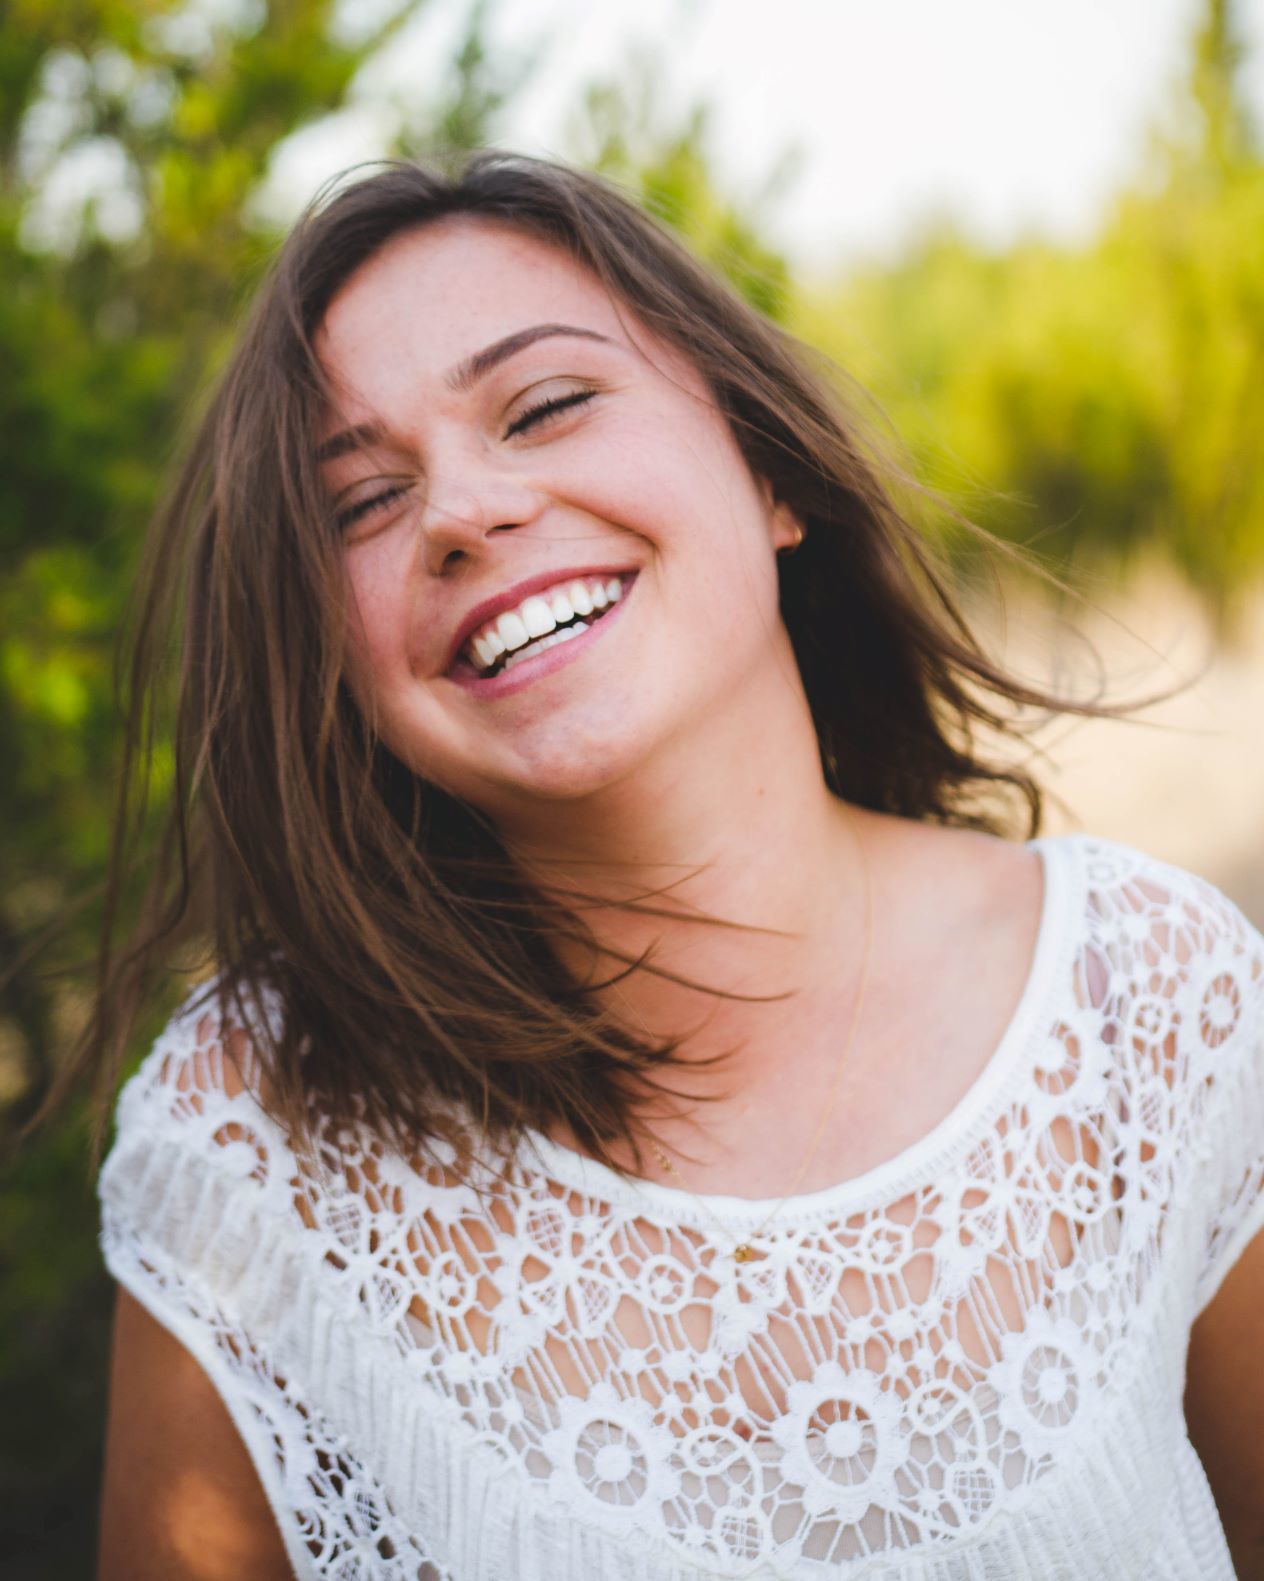 Potential Side Effects of Over the Counter Teeth Whitening Products